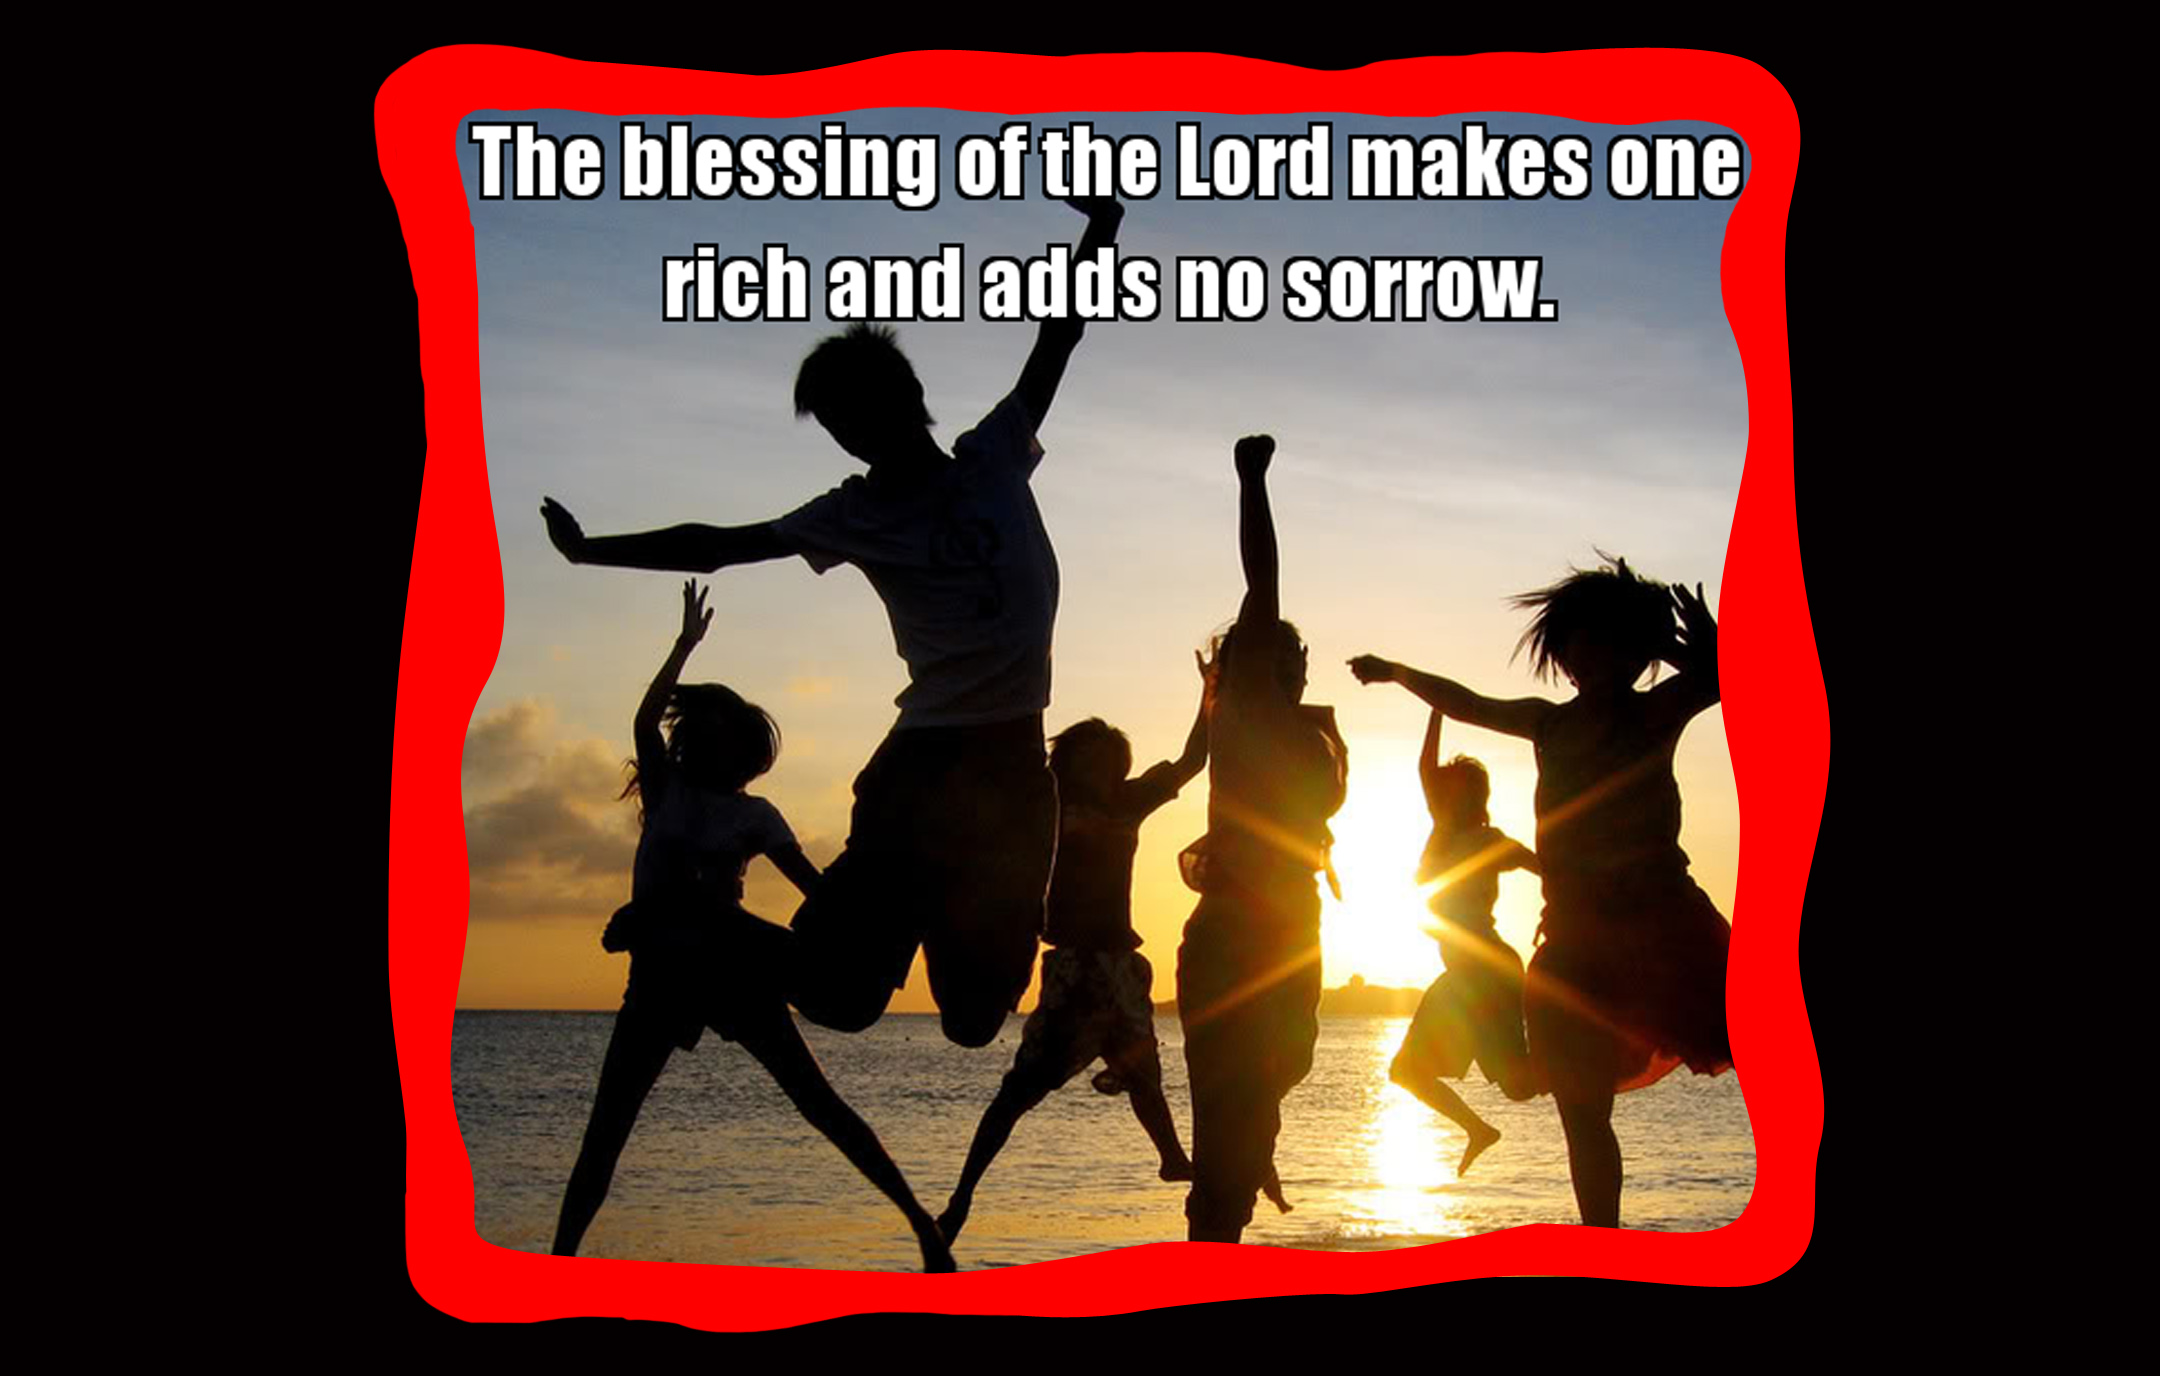 the blessing of the lord makes one rich and adds no sorrow if its stressing you out check your source